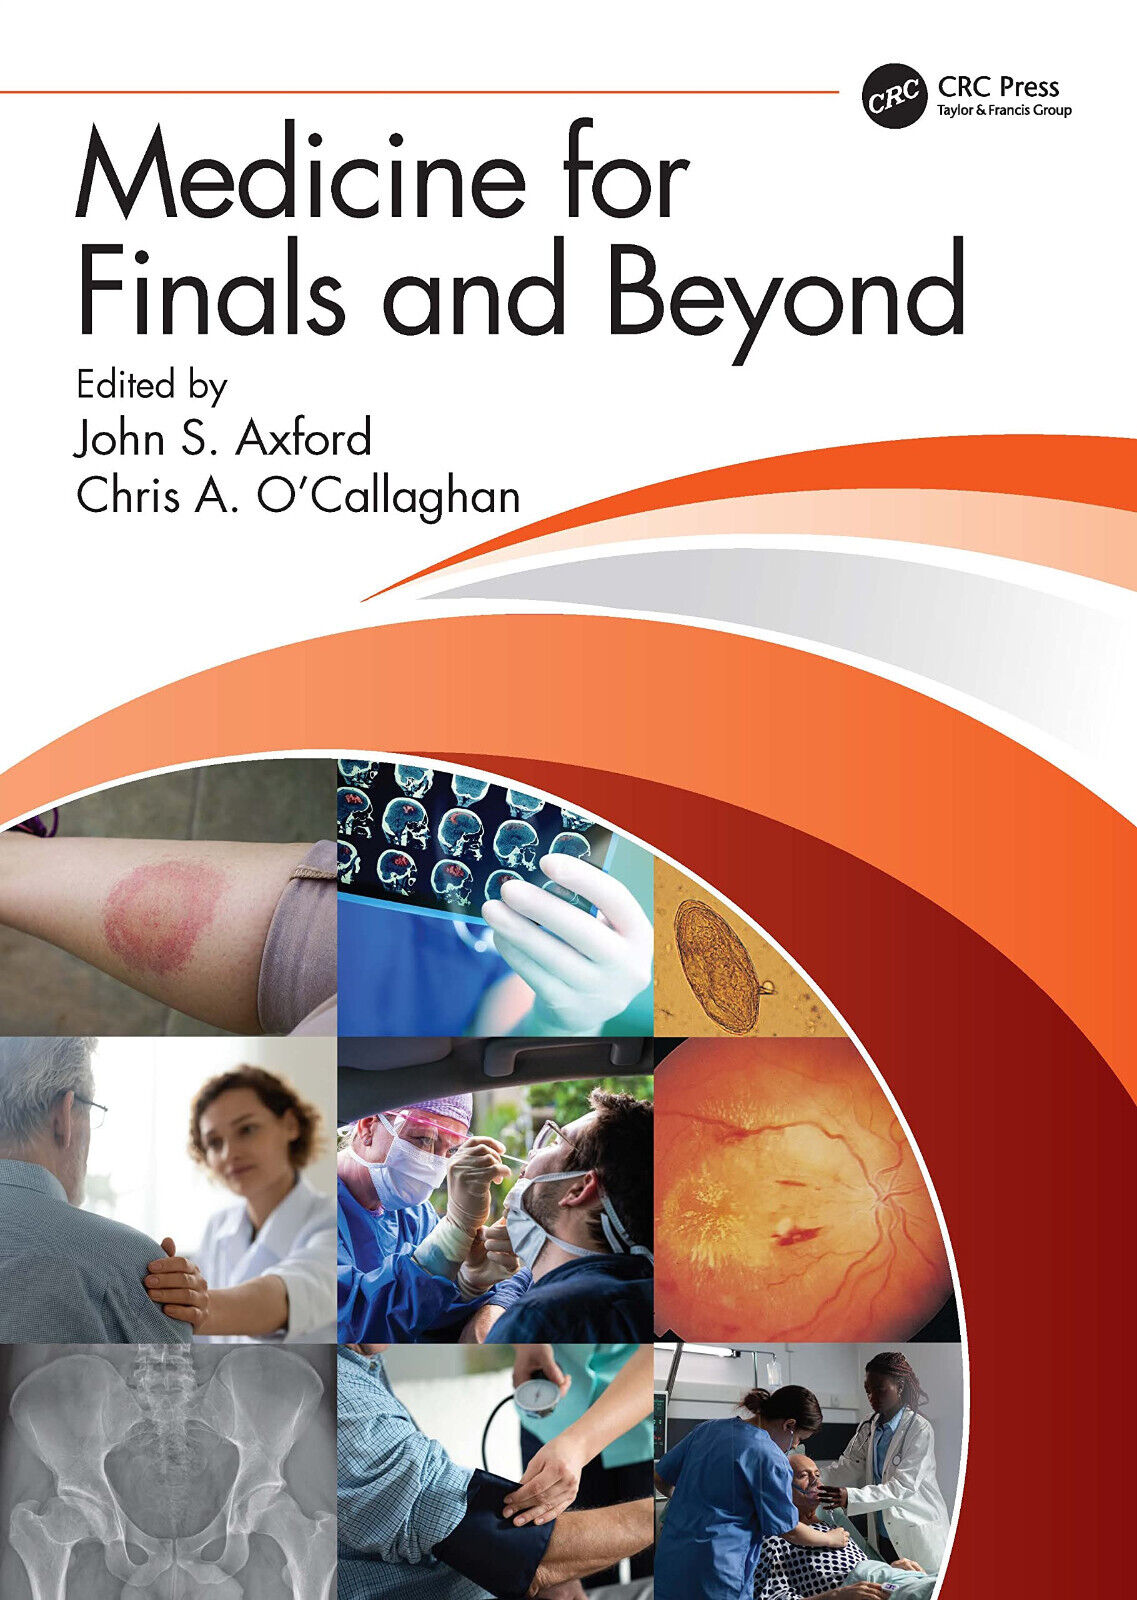 Medicine for Finals and Beyond -  John S. Axford  - CRC Press, 2022